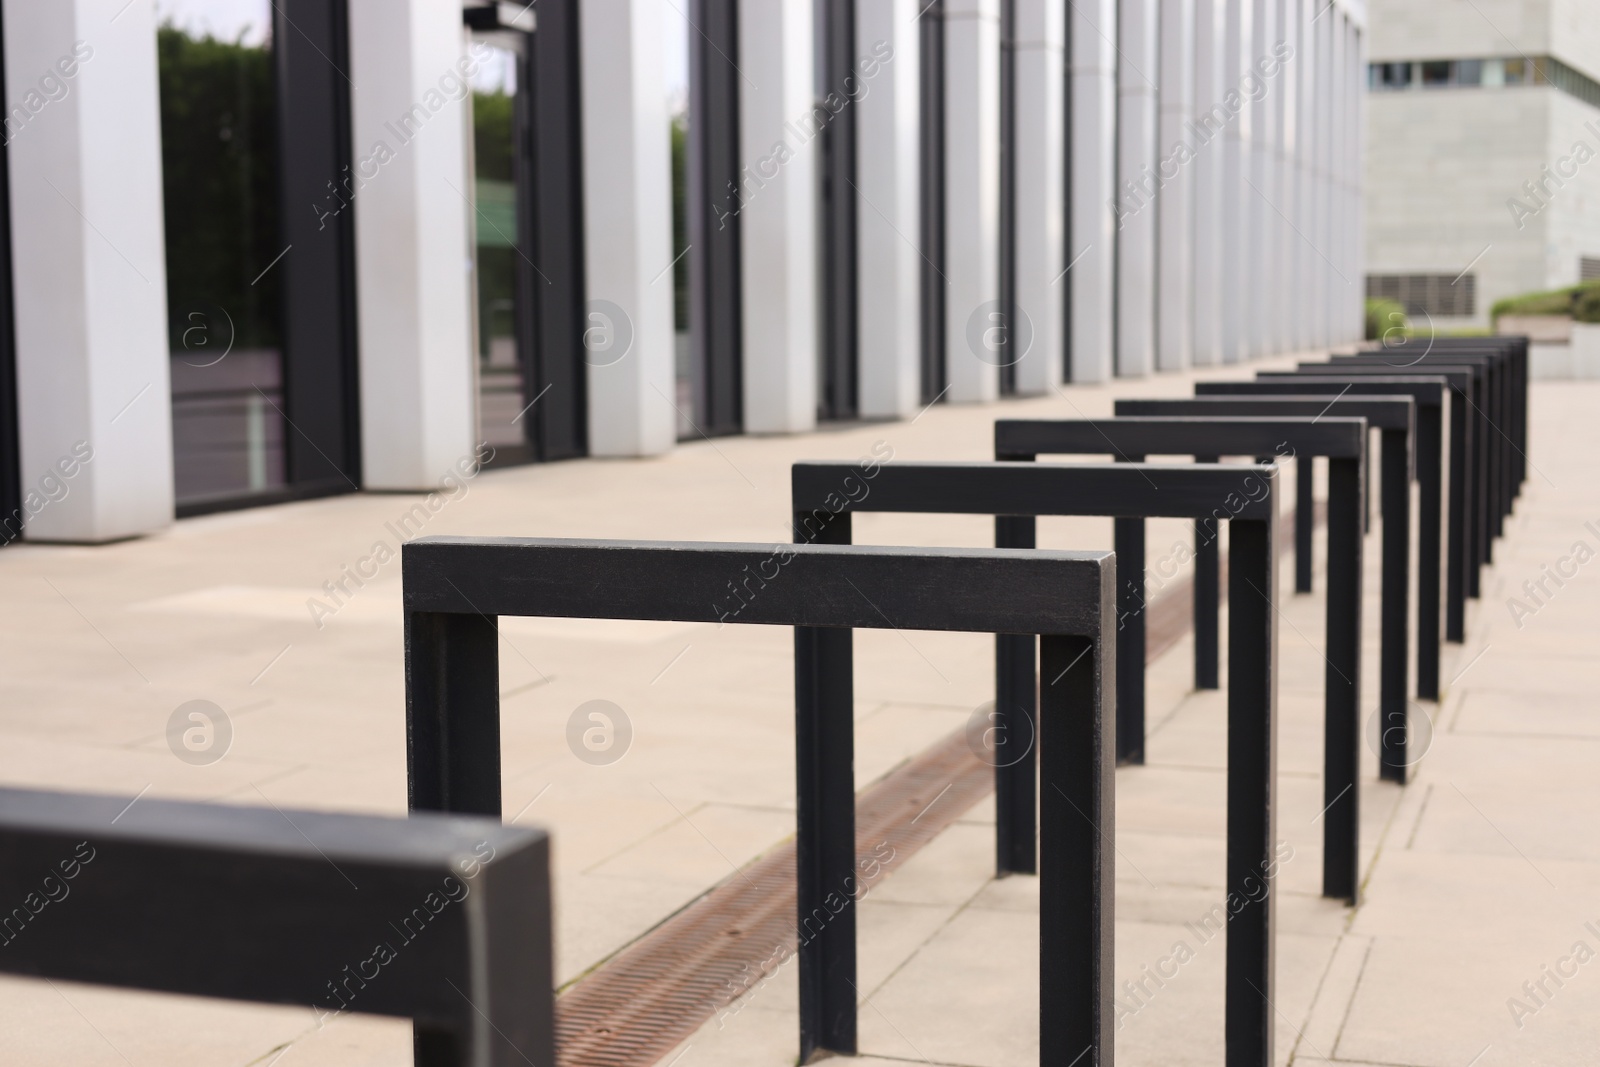 Photo of Empty bicycle stands near building on city street